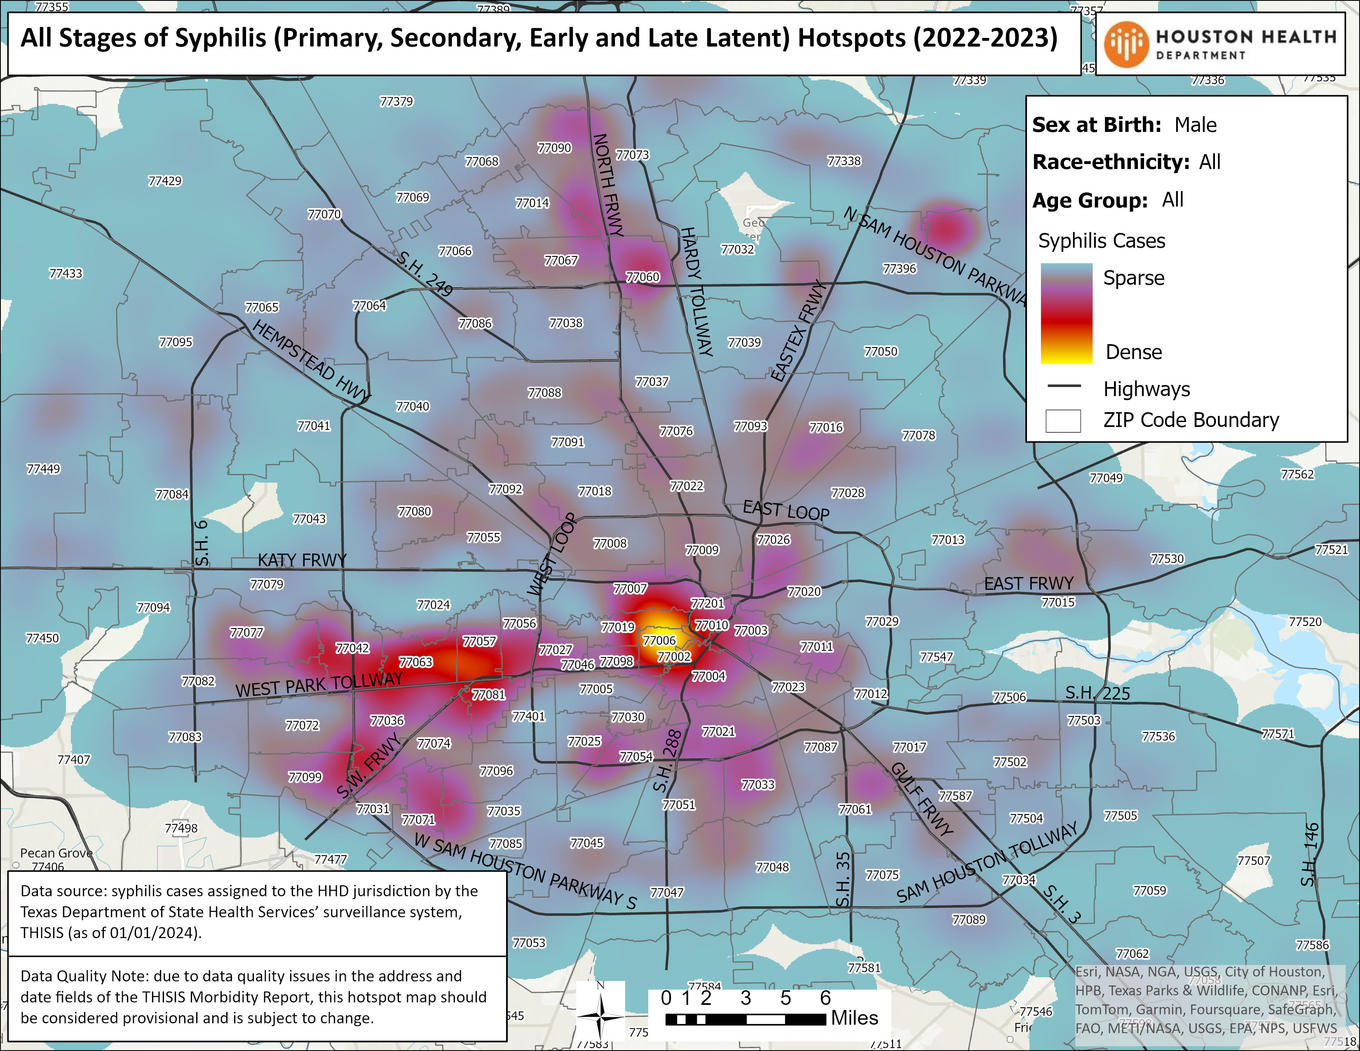 All Stage of Syphilis(Primary, Secondary, Early and Late Latent) Hotspots (2022-2023). Sex at birth: Male